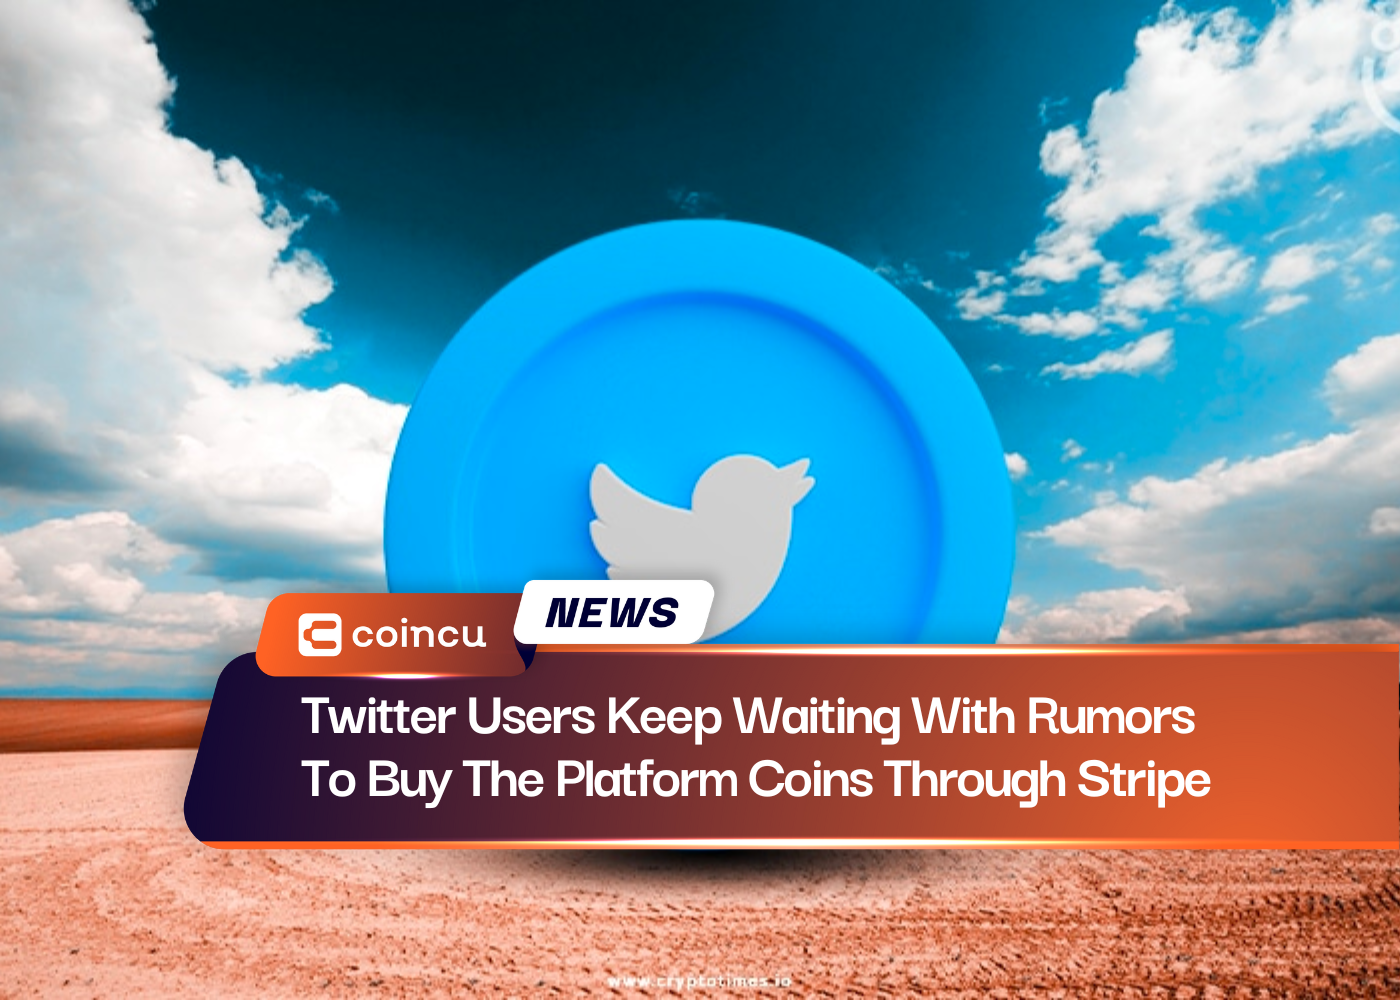 Twitter Users Keep Waiting With Rumors To Buy The Platform Coins Through Stripe